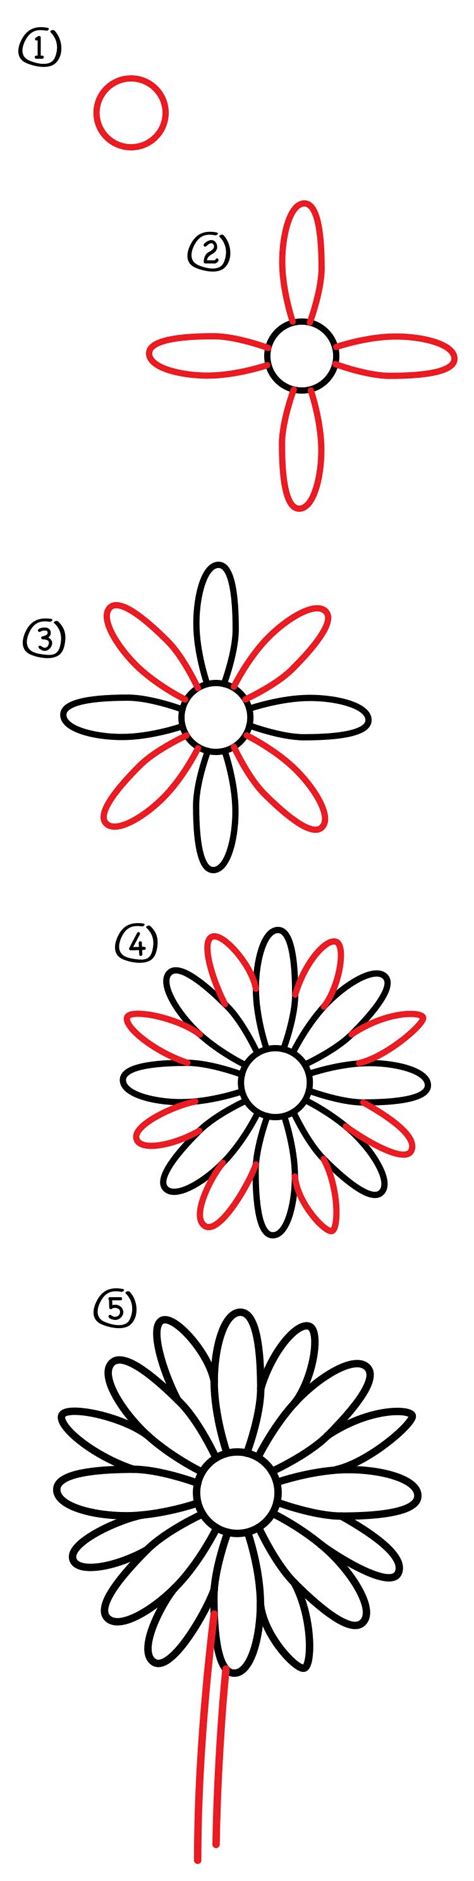 Take a good look at some different photos of the flower you are drawing to see how different specimens vary. How To Draw A Daisy Flower - Art For Kids Hub - | Daisy ...